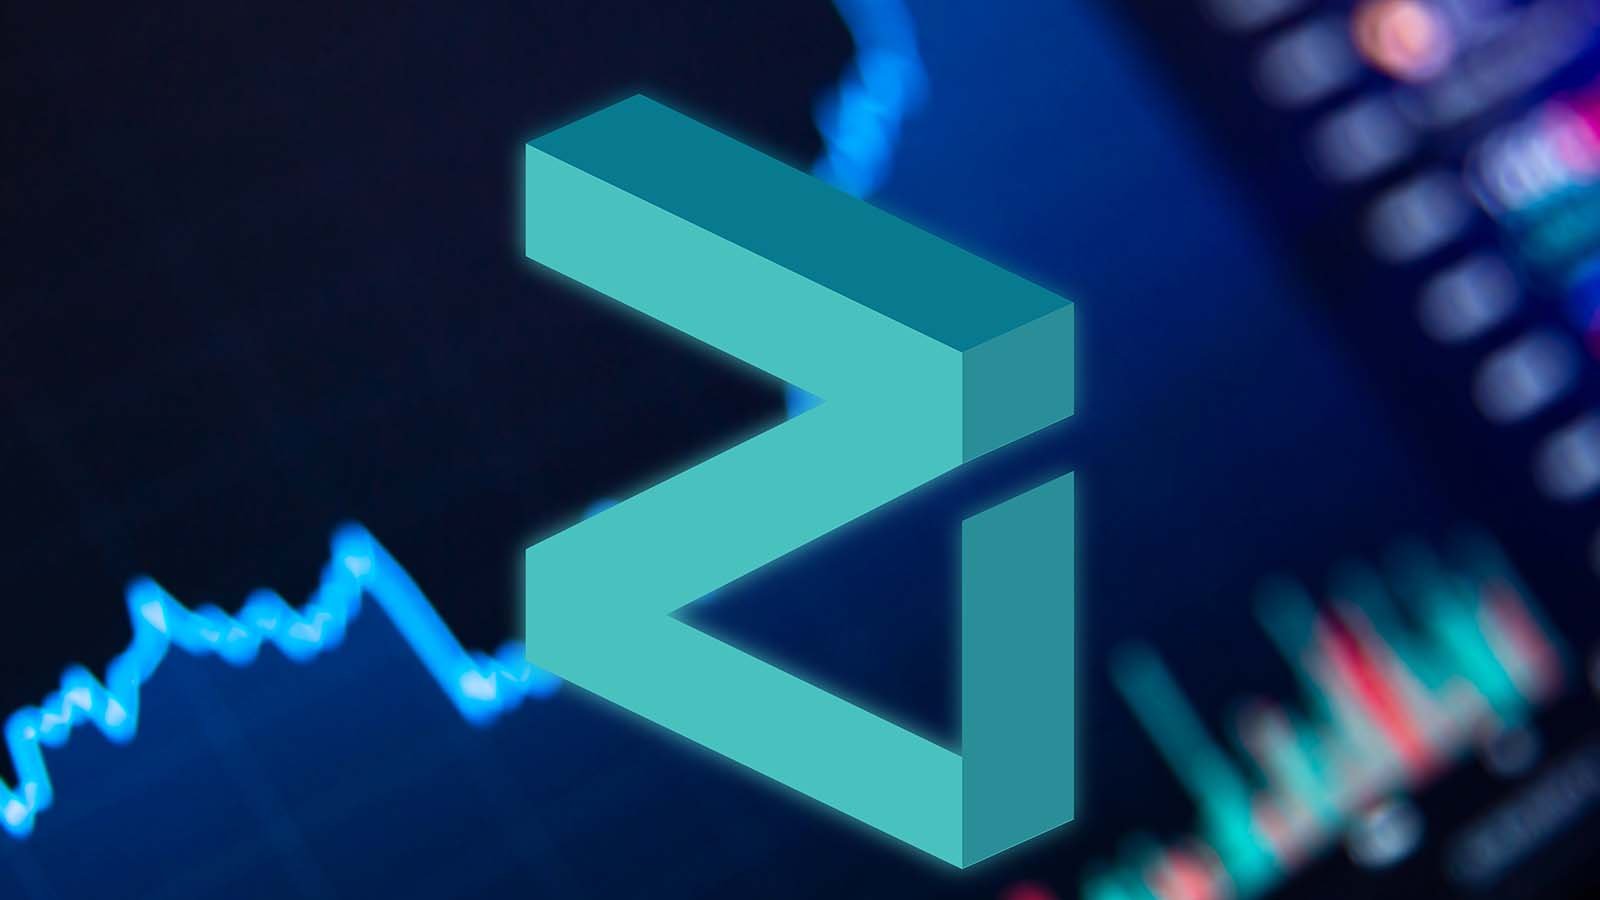 The Zilliqa (ZIL) crypto logo in front of a trading chart illustration.